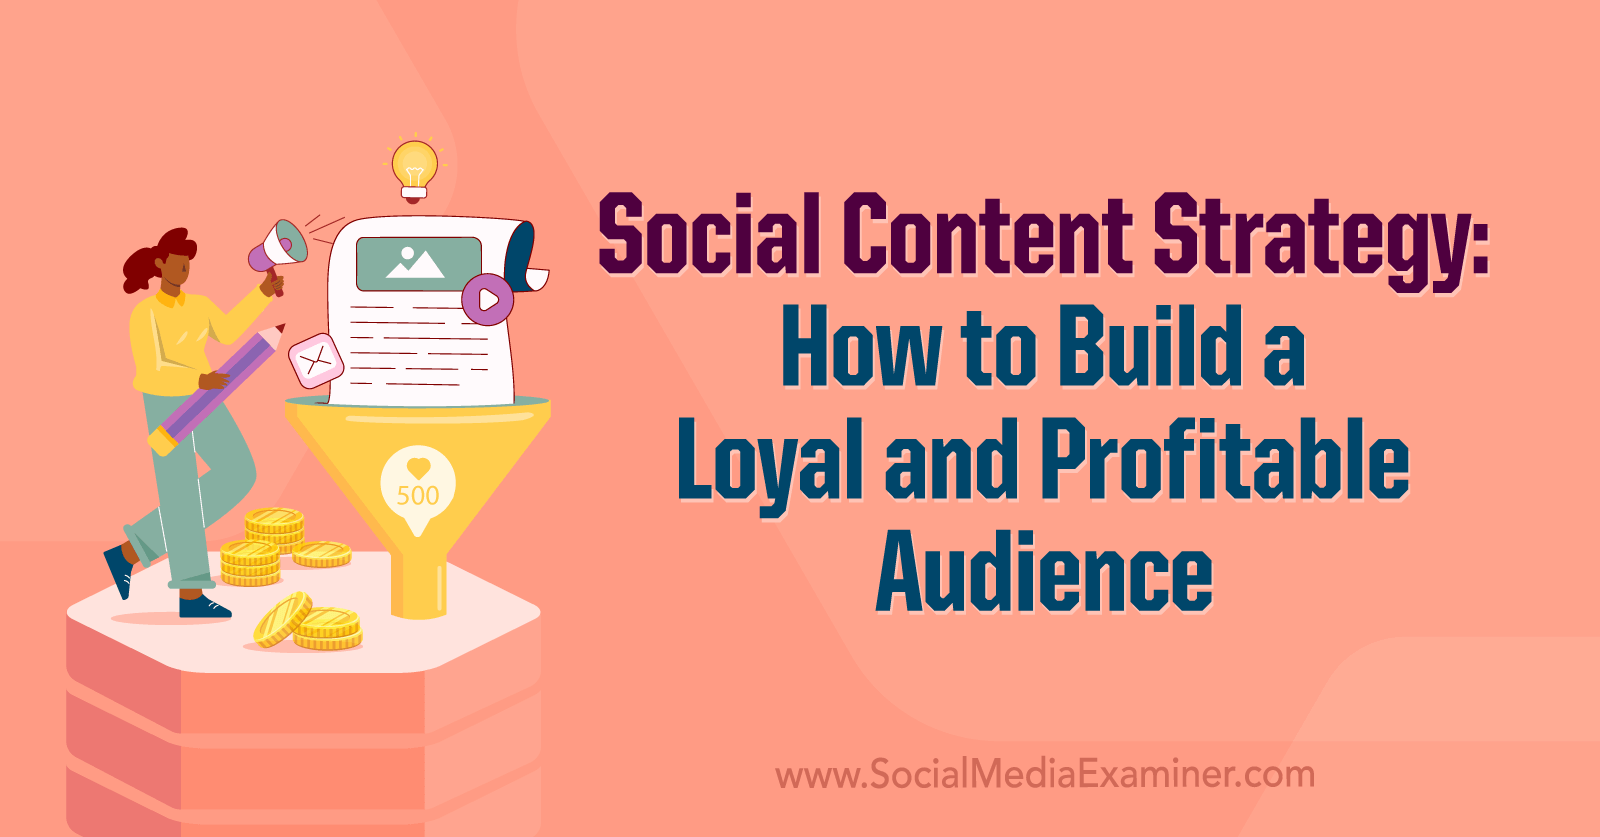 Social Content Strategy: How to Build a Loyal and Profitable Audience by Social Media Examiner